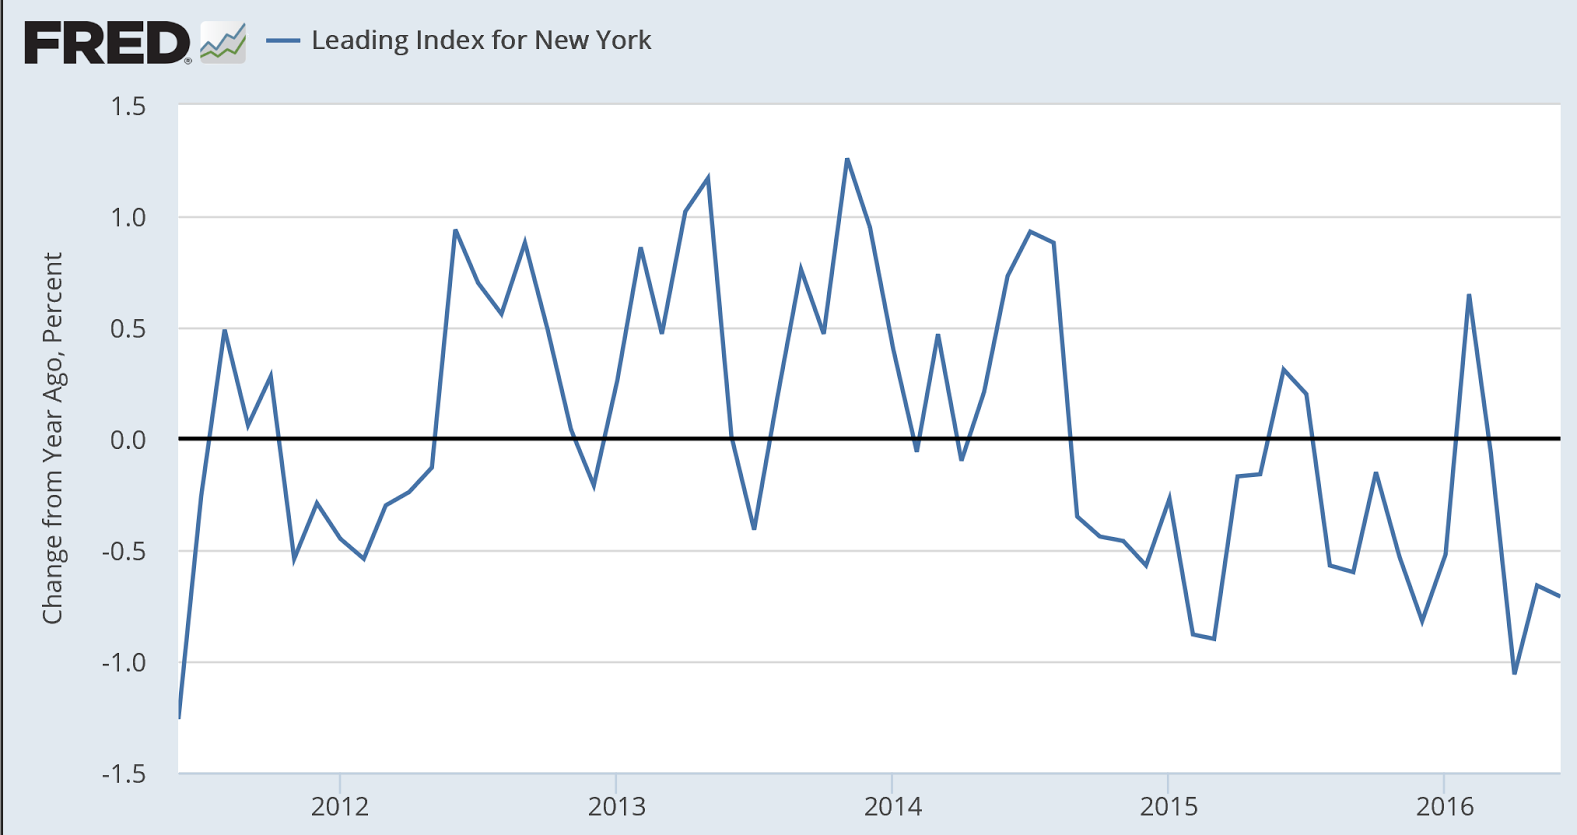 Italian banks, Campaign finance, NY ISM, July vehicle sales